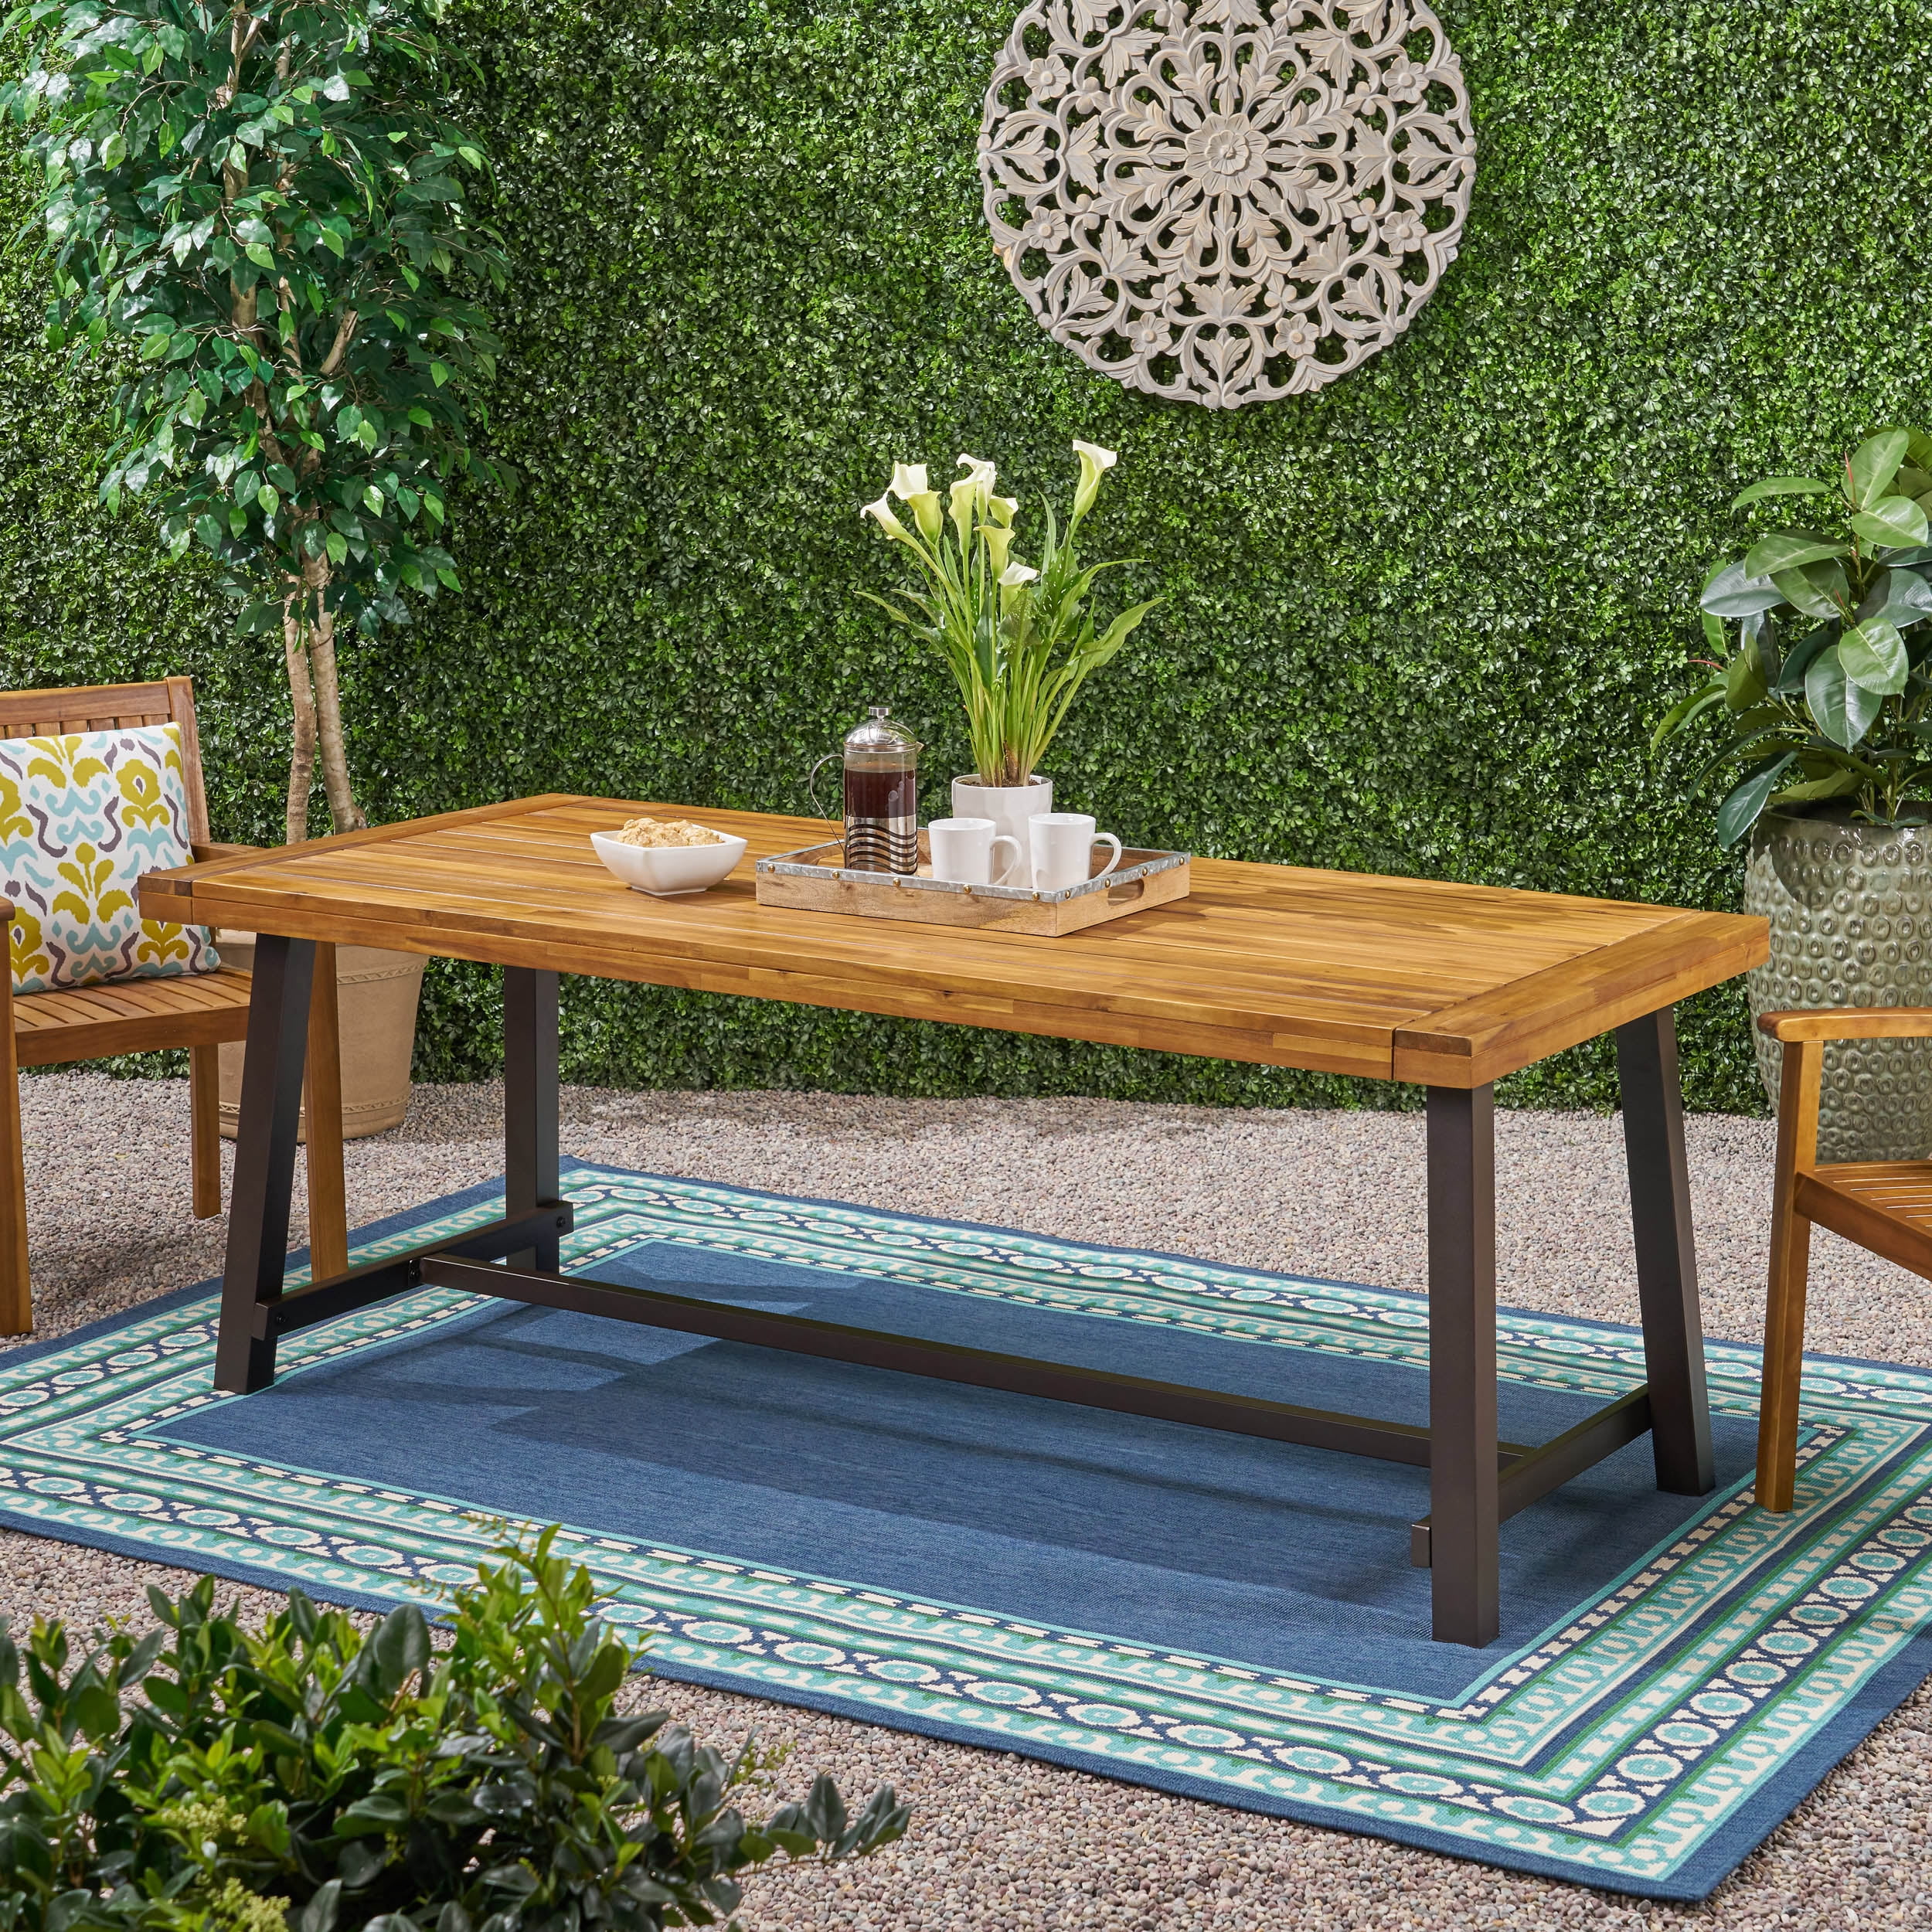 Kamden Outdoor Eight-Seater Wooden Dining Table, Teak and Rustic Metal ...